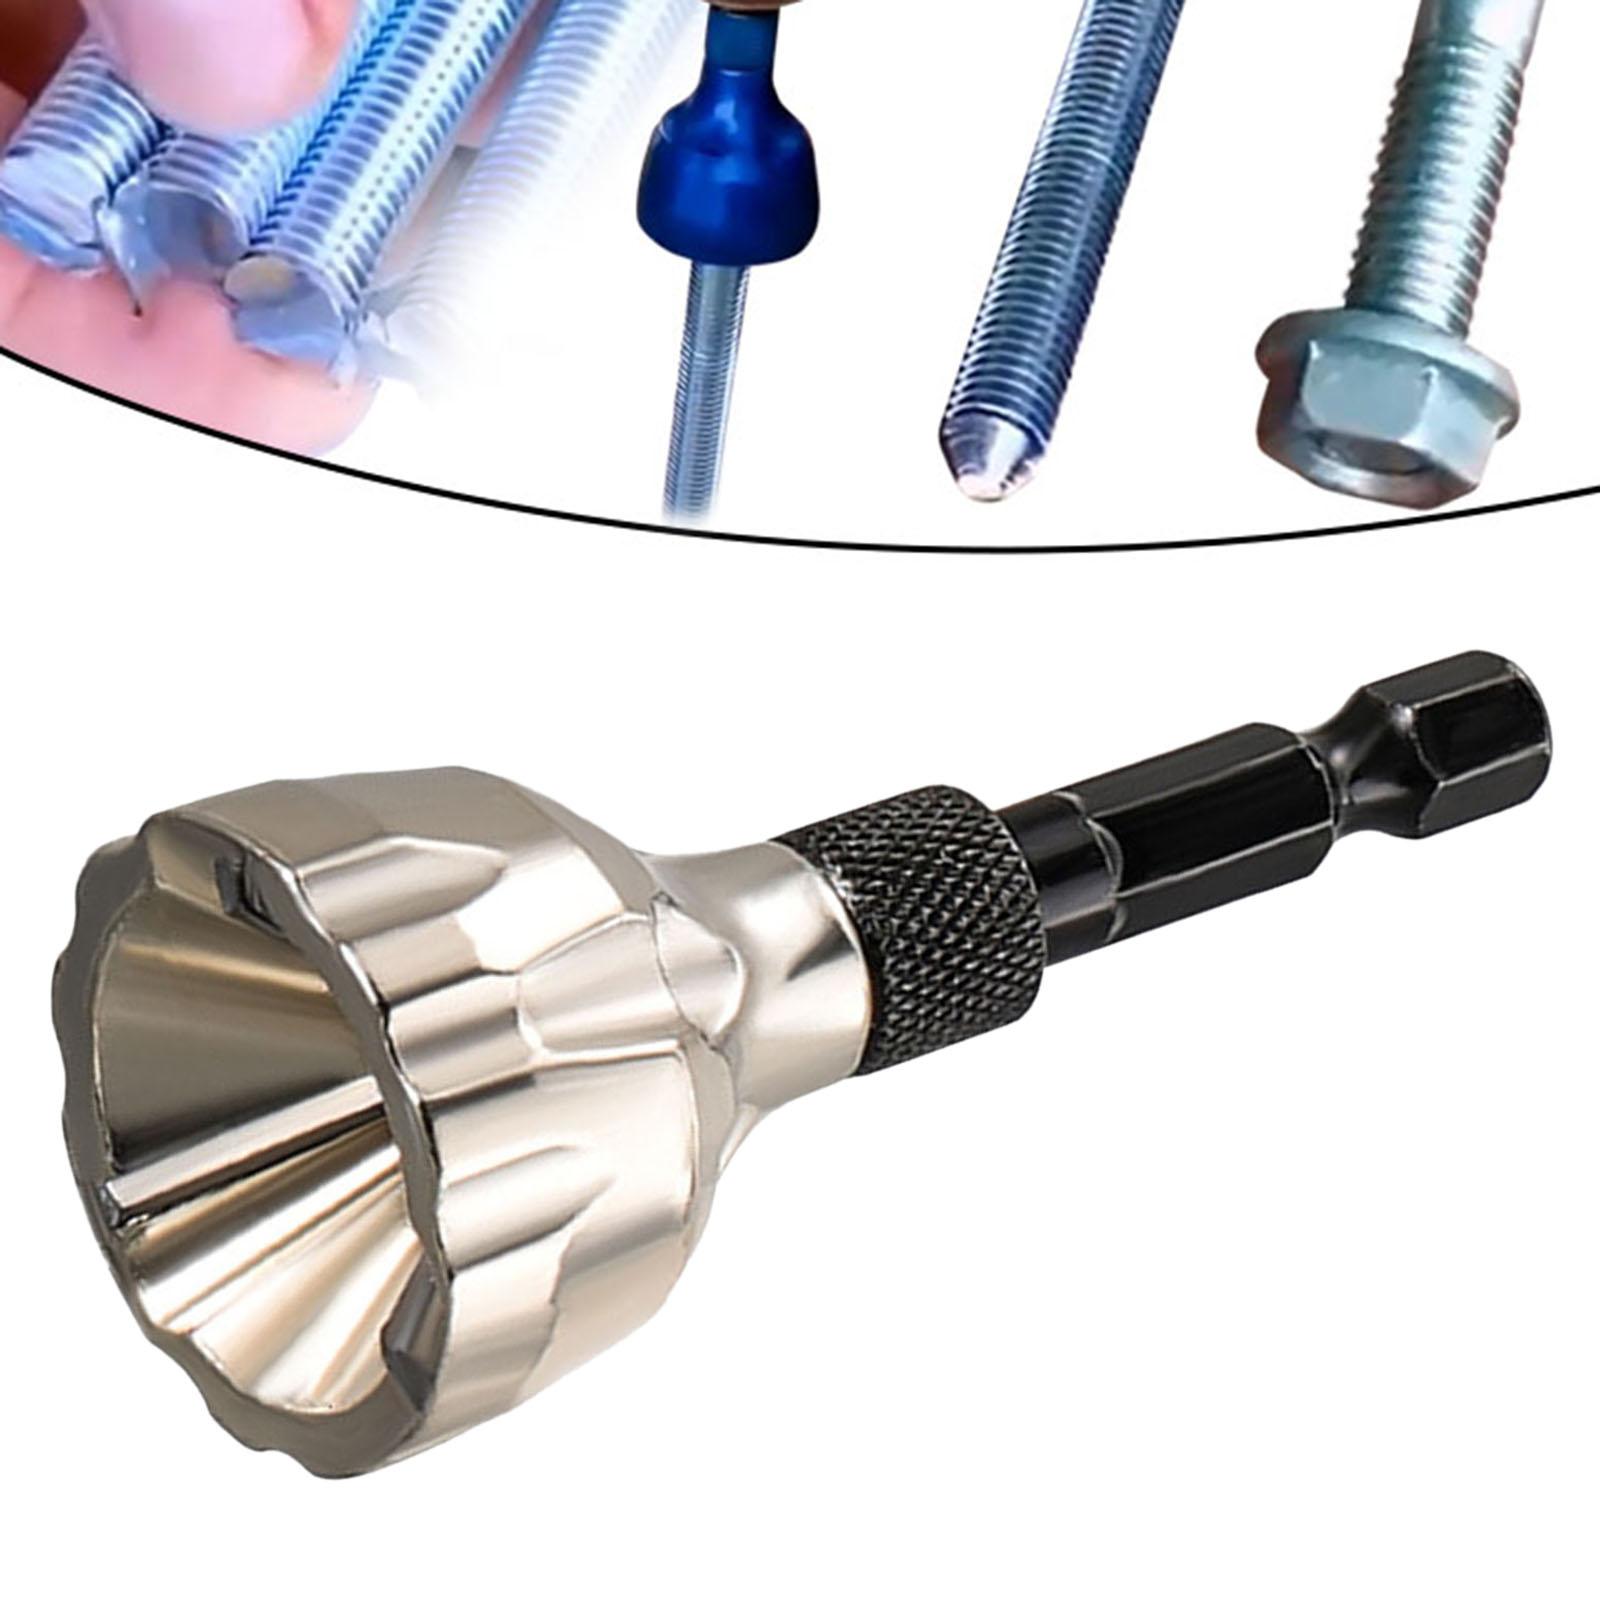 Deburring External Chamfer Tool Deburring Drill Bit for Damaged Bolts 5-20mm Silver